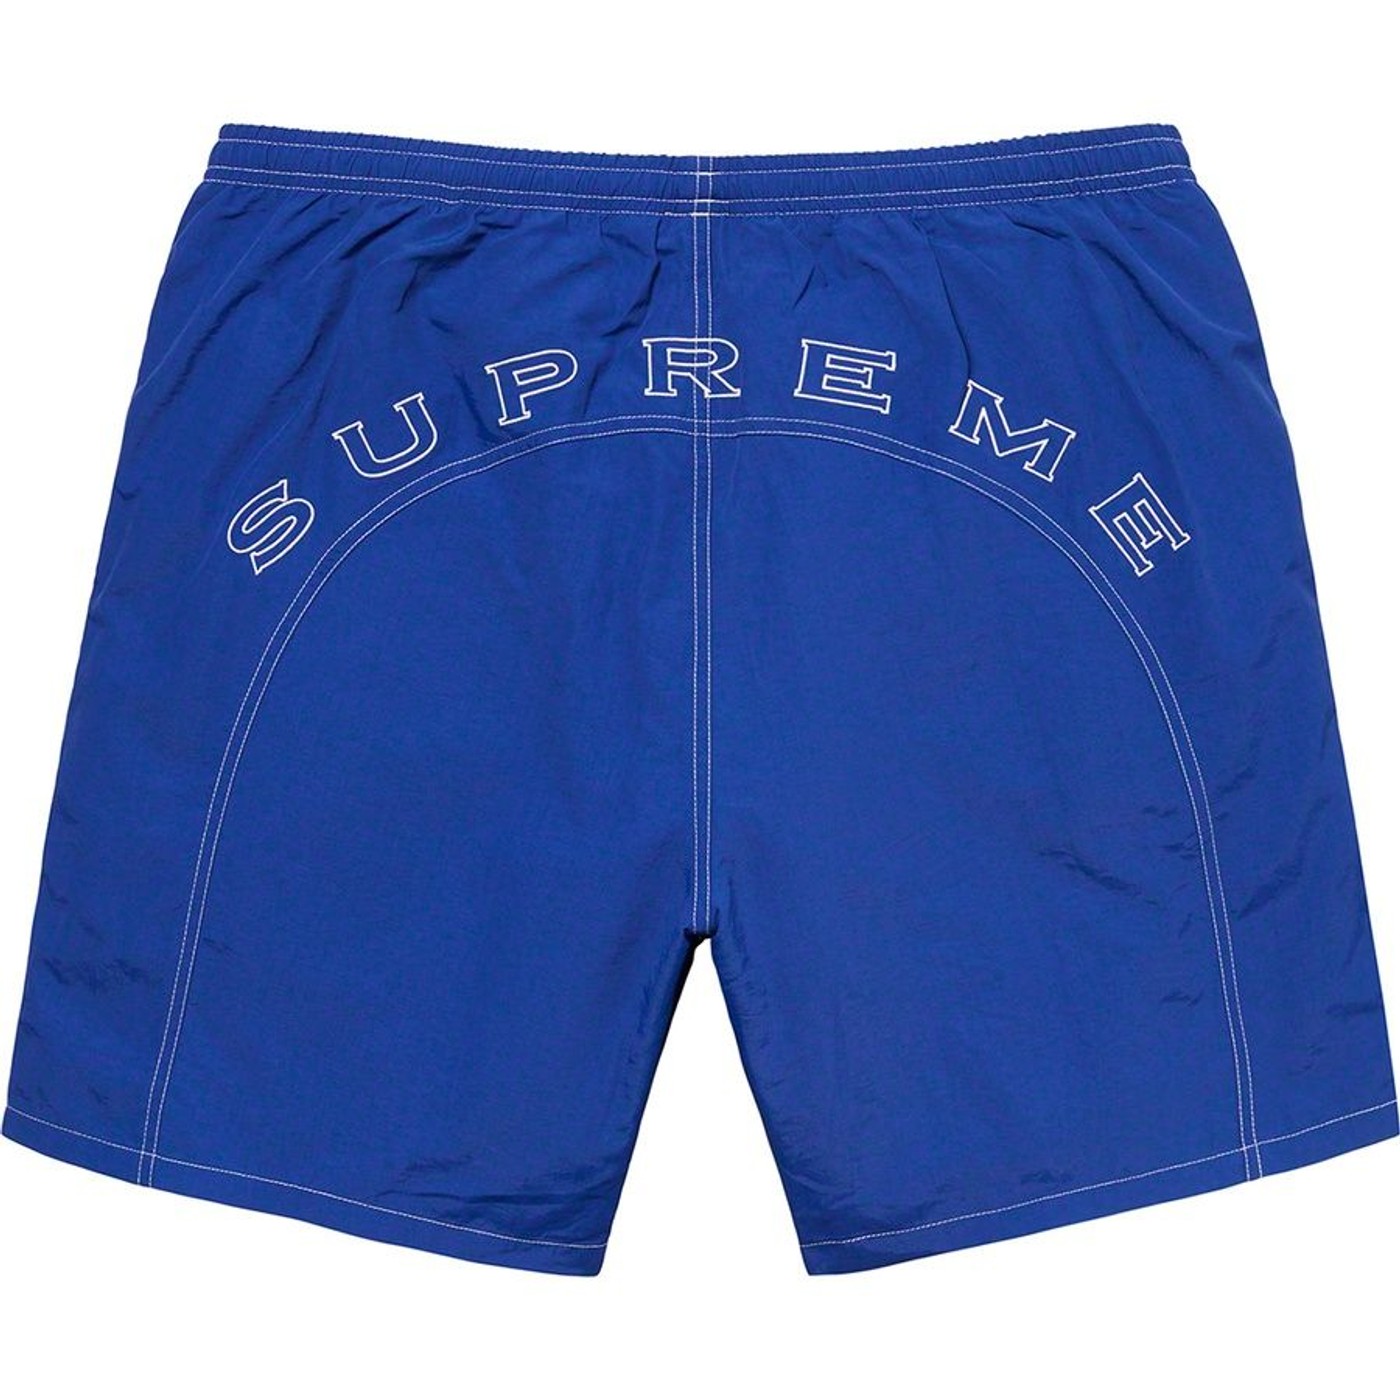 Authentic re-worked Supreme compression cycle shorts with Supreme